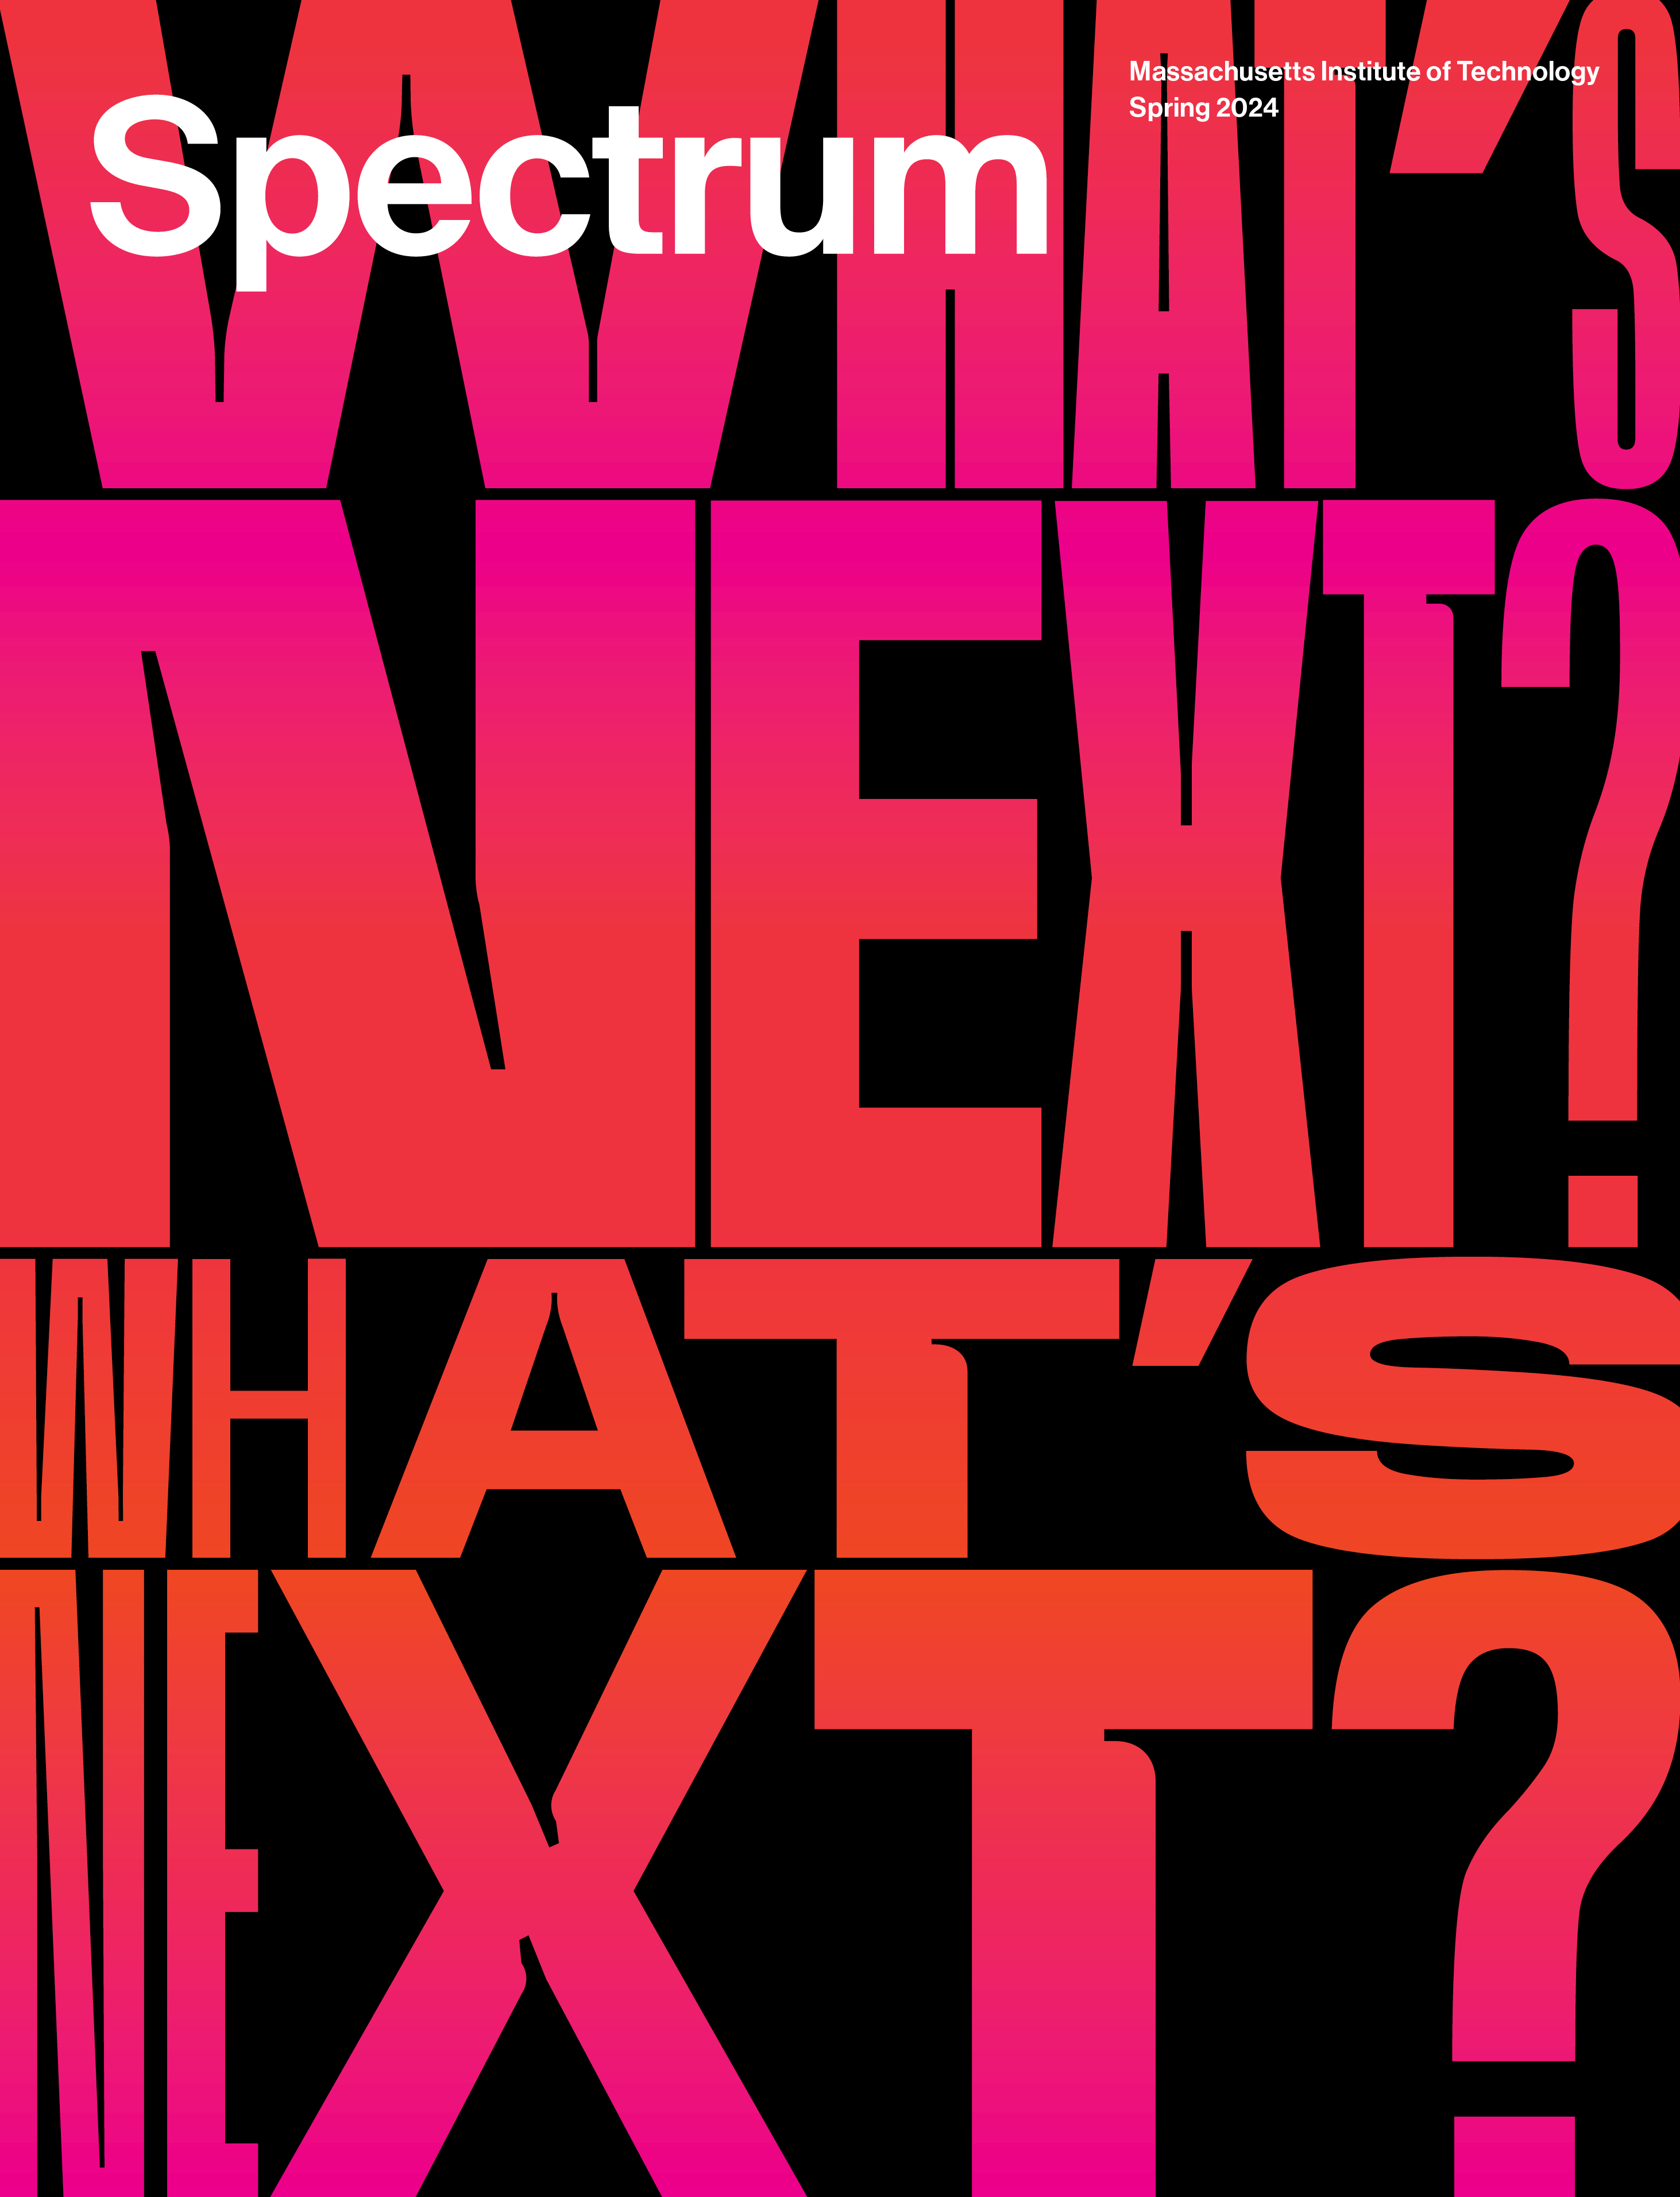 "What's Next?" written in red/pink all-caps against a black background.